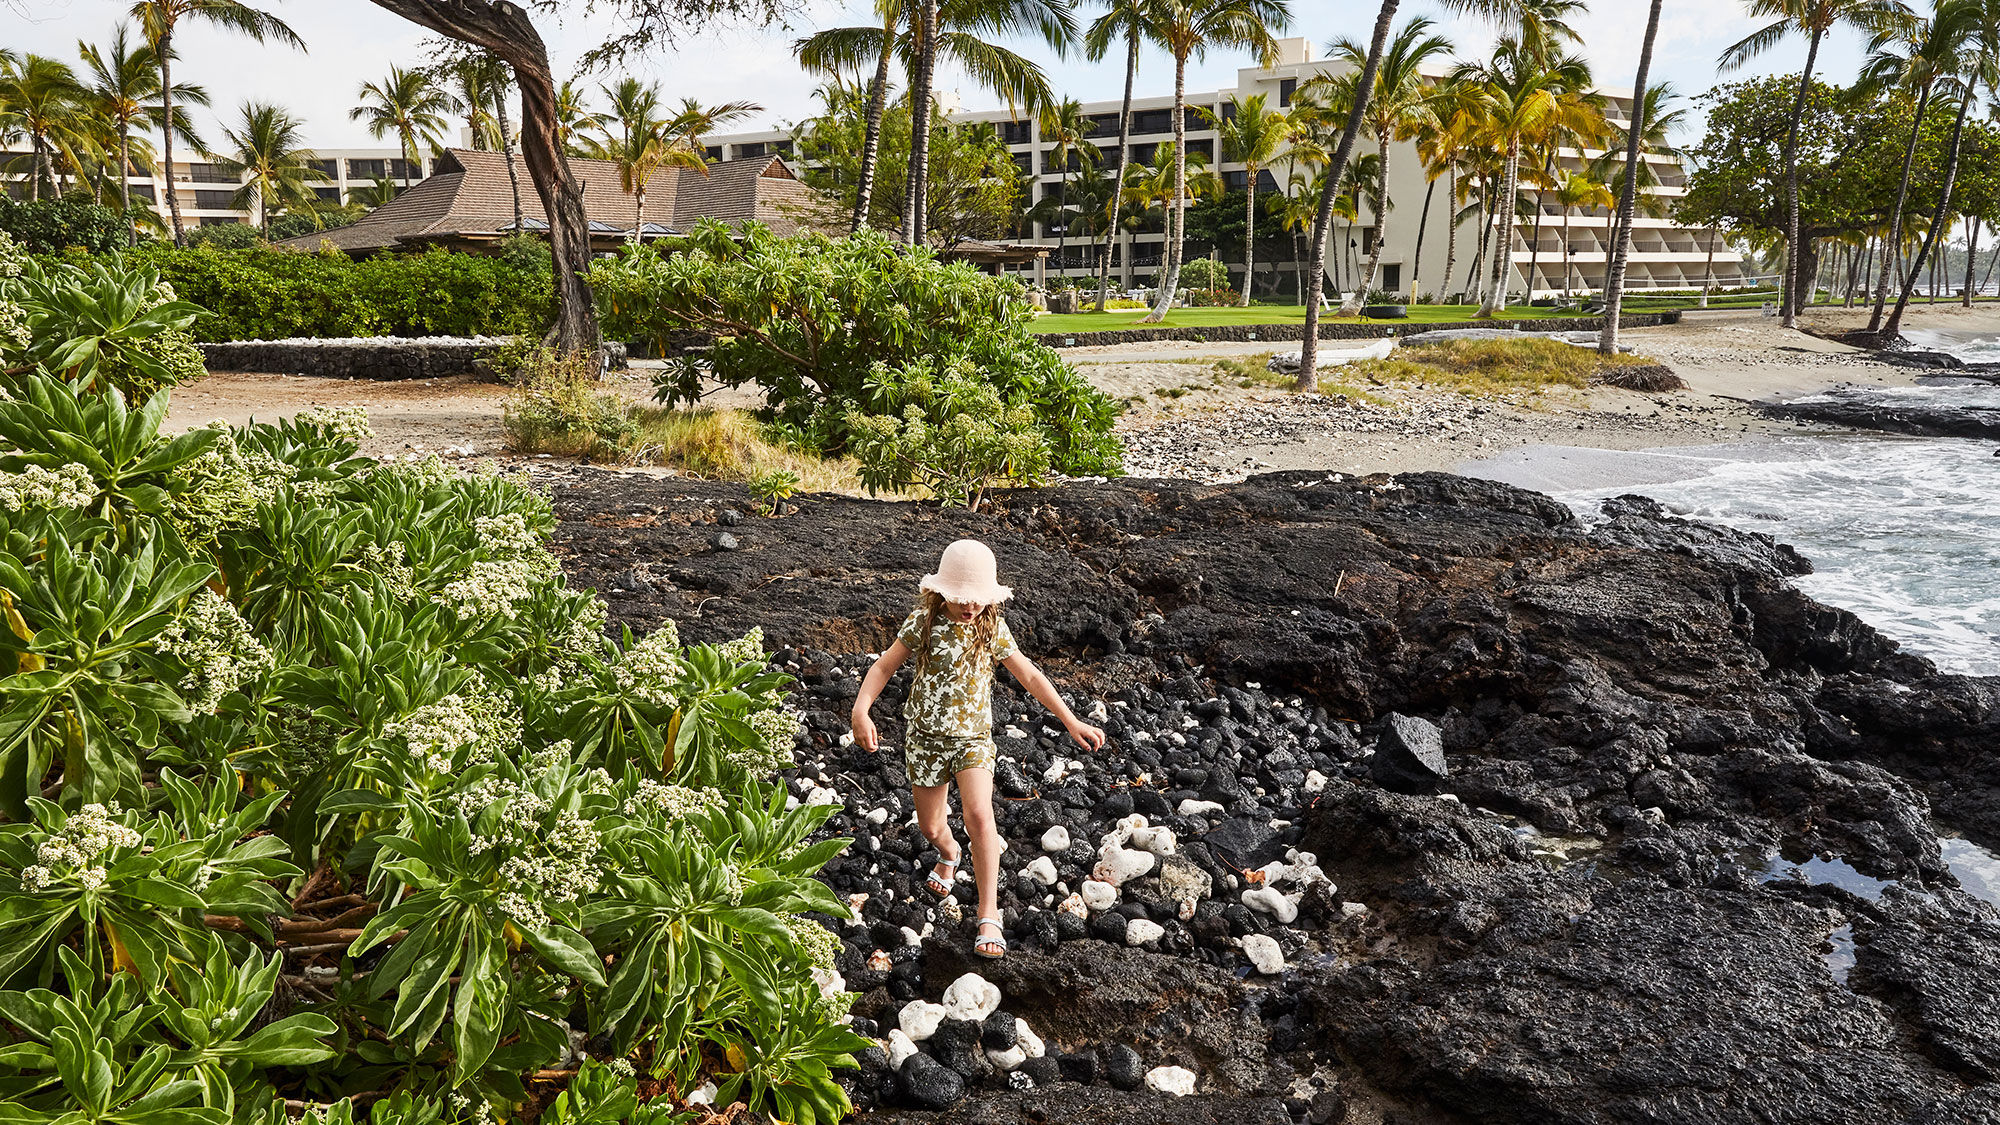 The Mauna Lani, Auberge Resorts Collection is offering a number of different summer activity programs for all ages, and some of them are one-of-a-kind experiences.